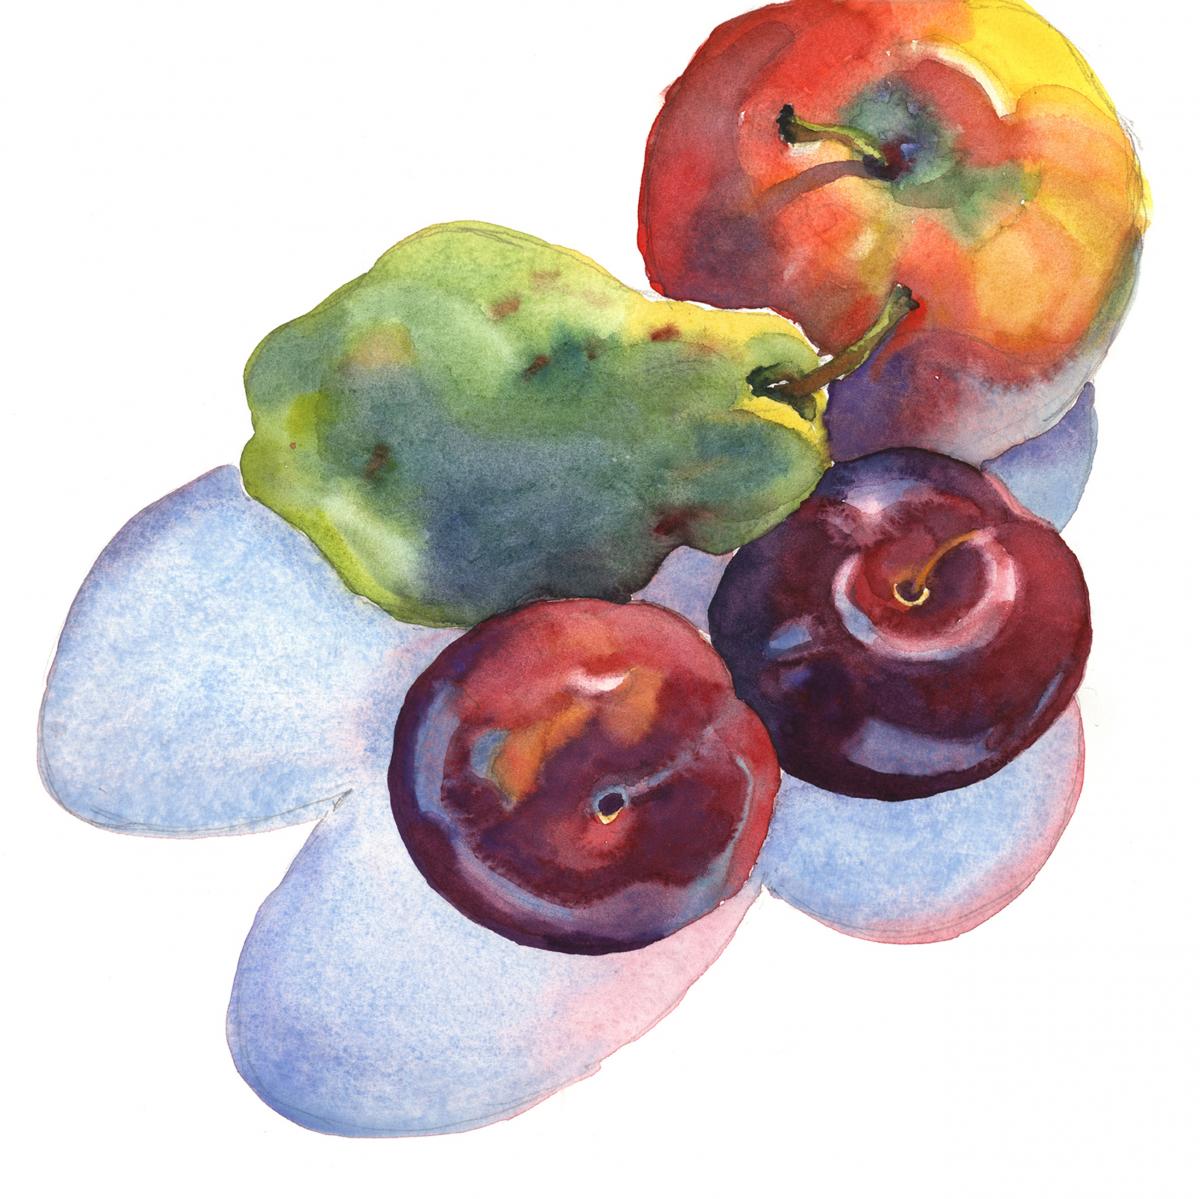 Fruit Casts Shadows Too -watercolor still life painting by Frank Costantino